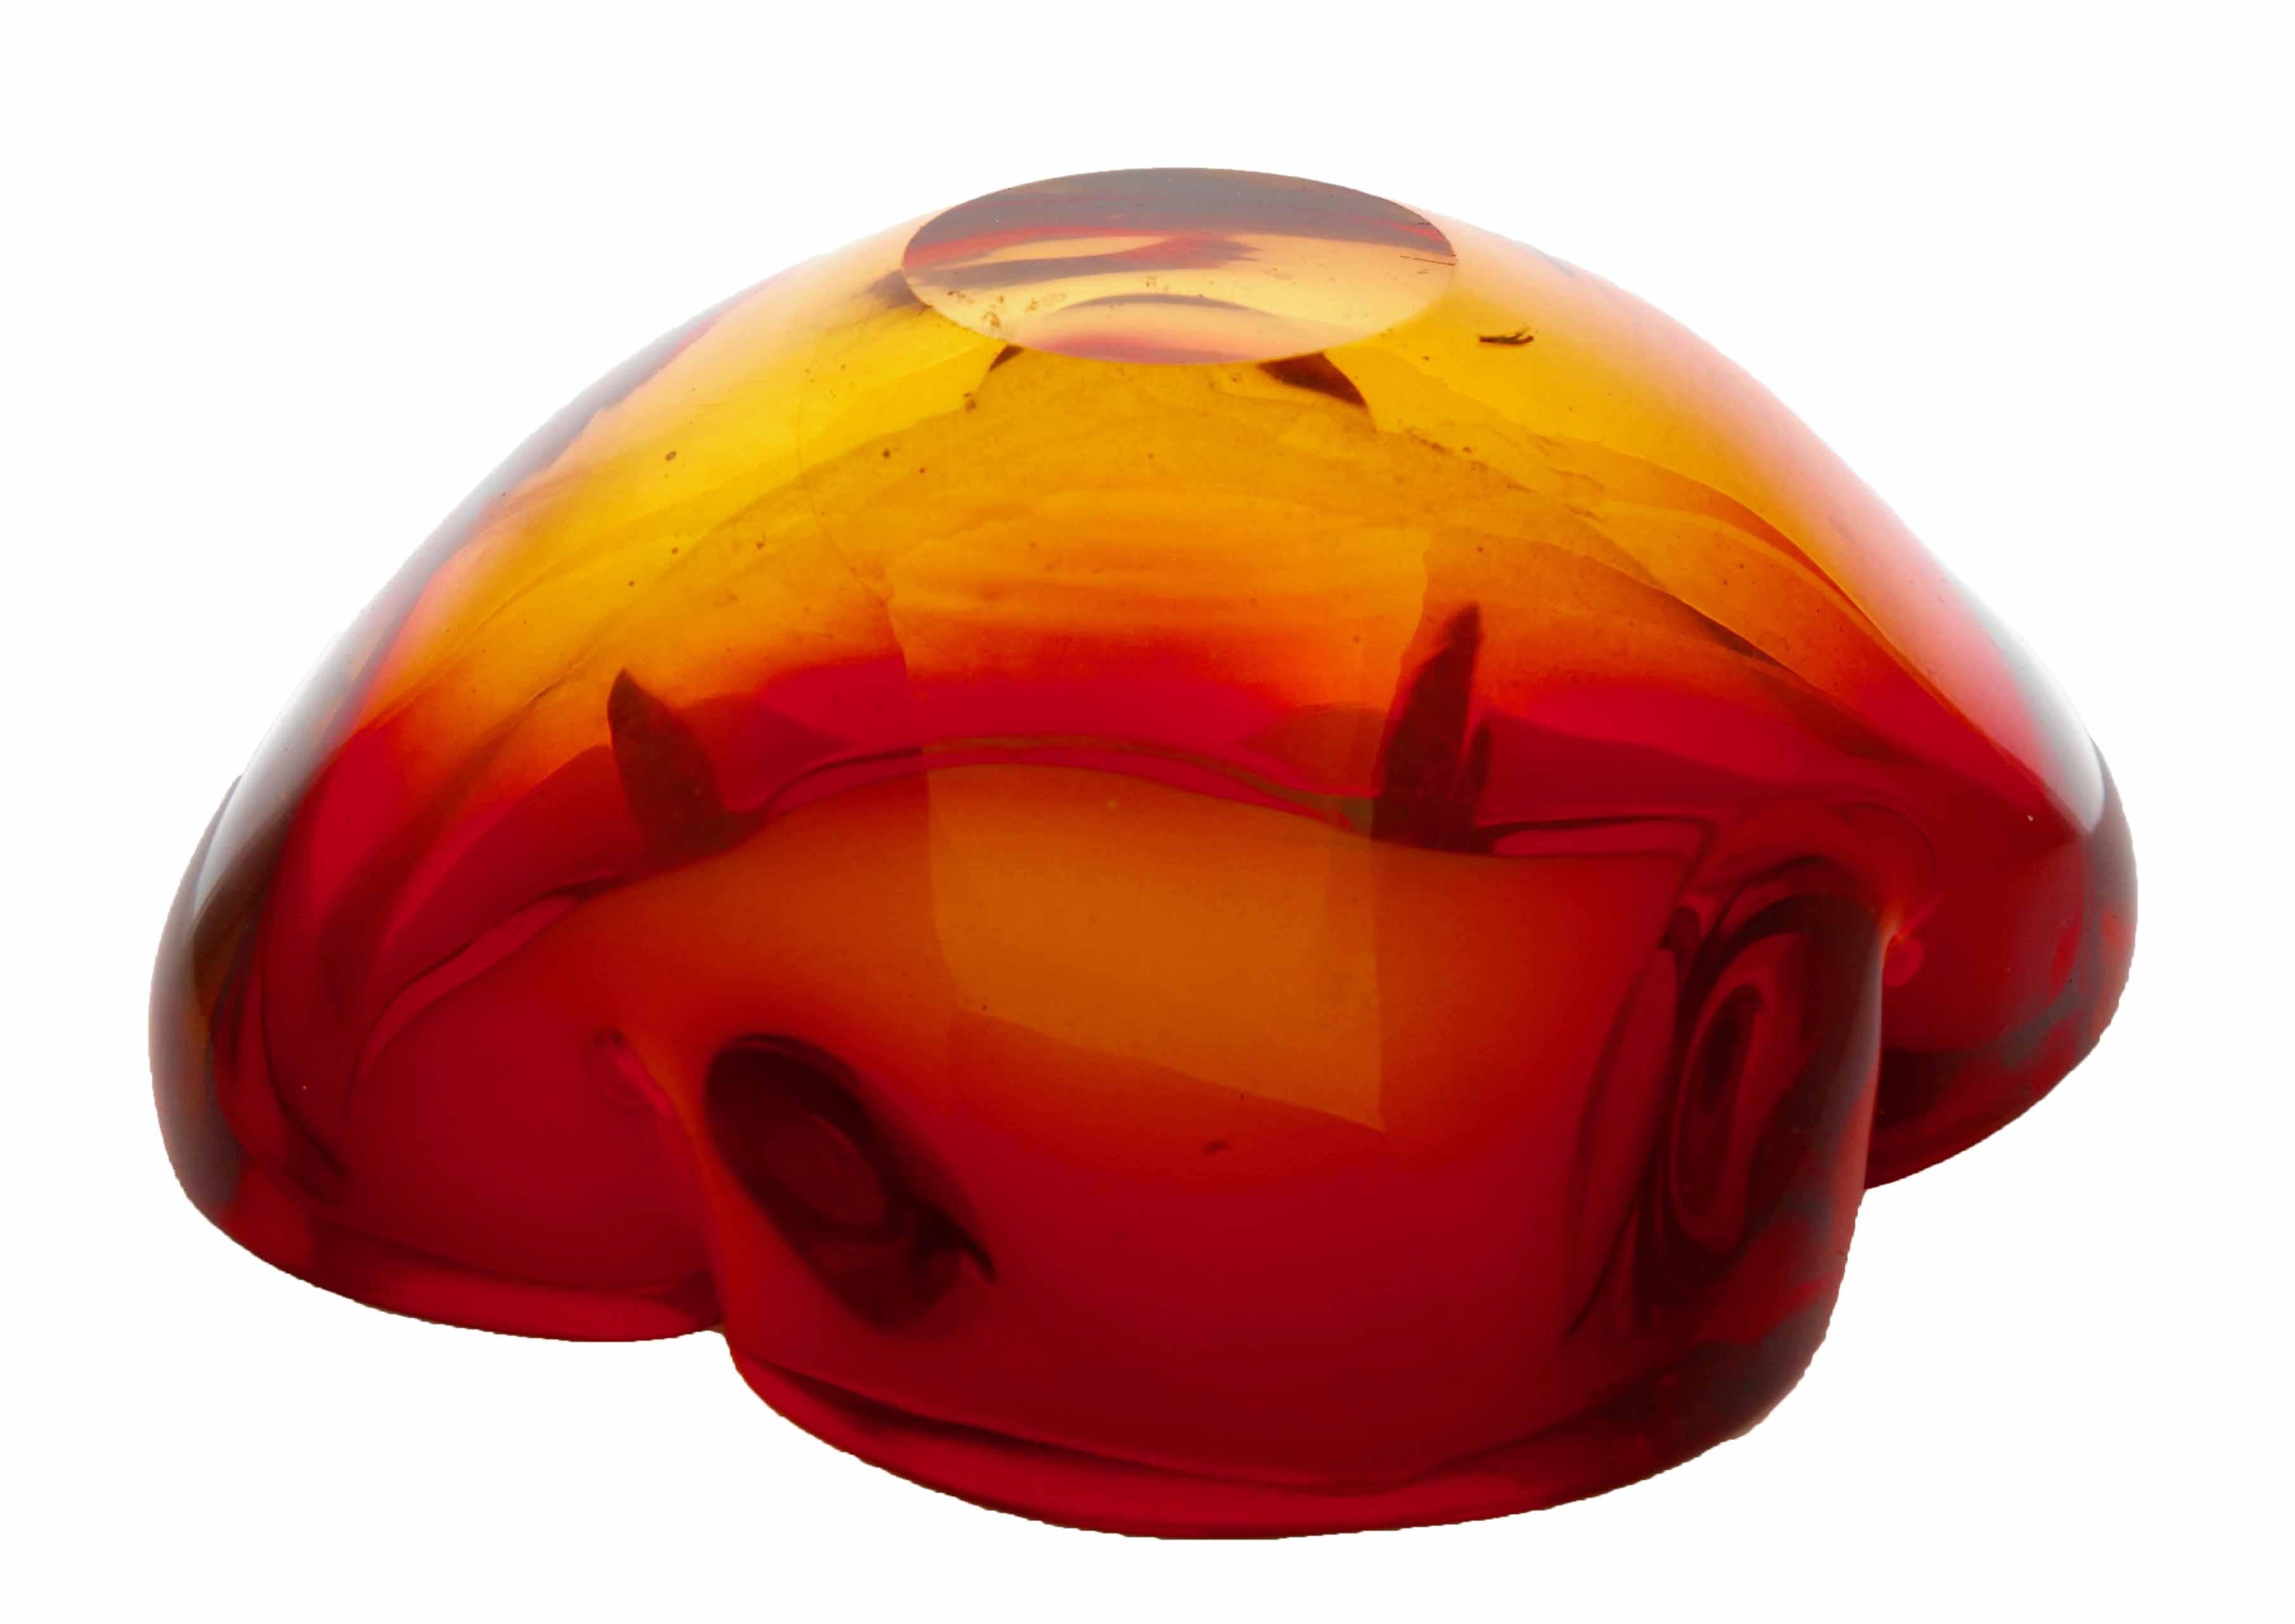 Hand-Crafted Murano Glass Bowl with Four Lobes, Attributed to Flavio Poli for Seguso